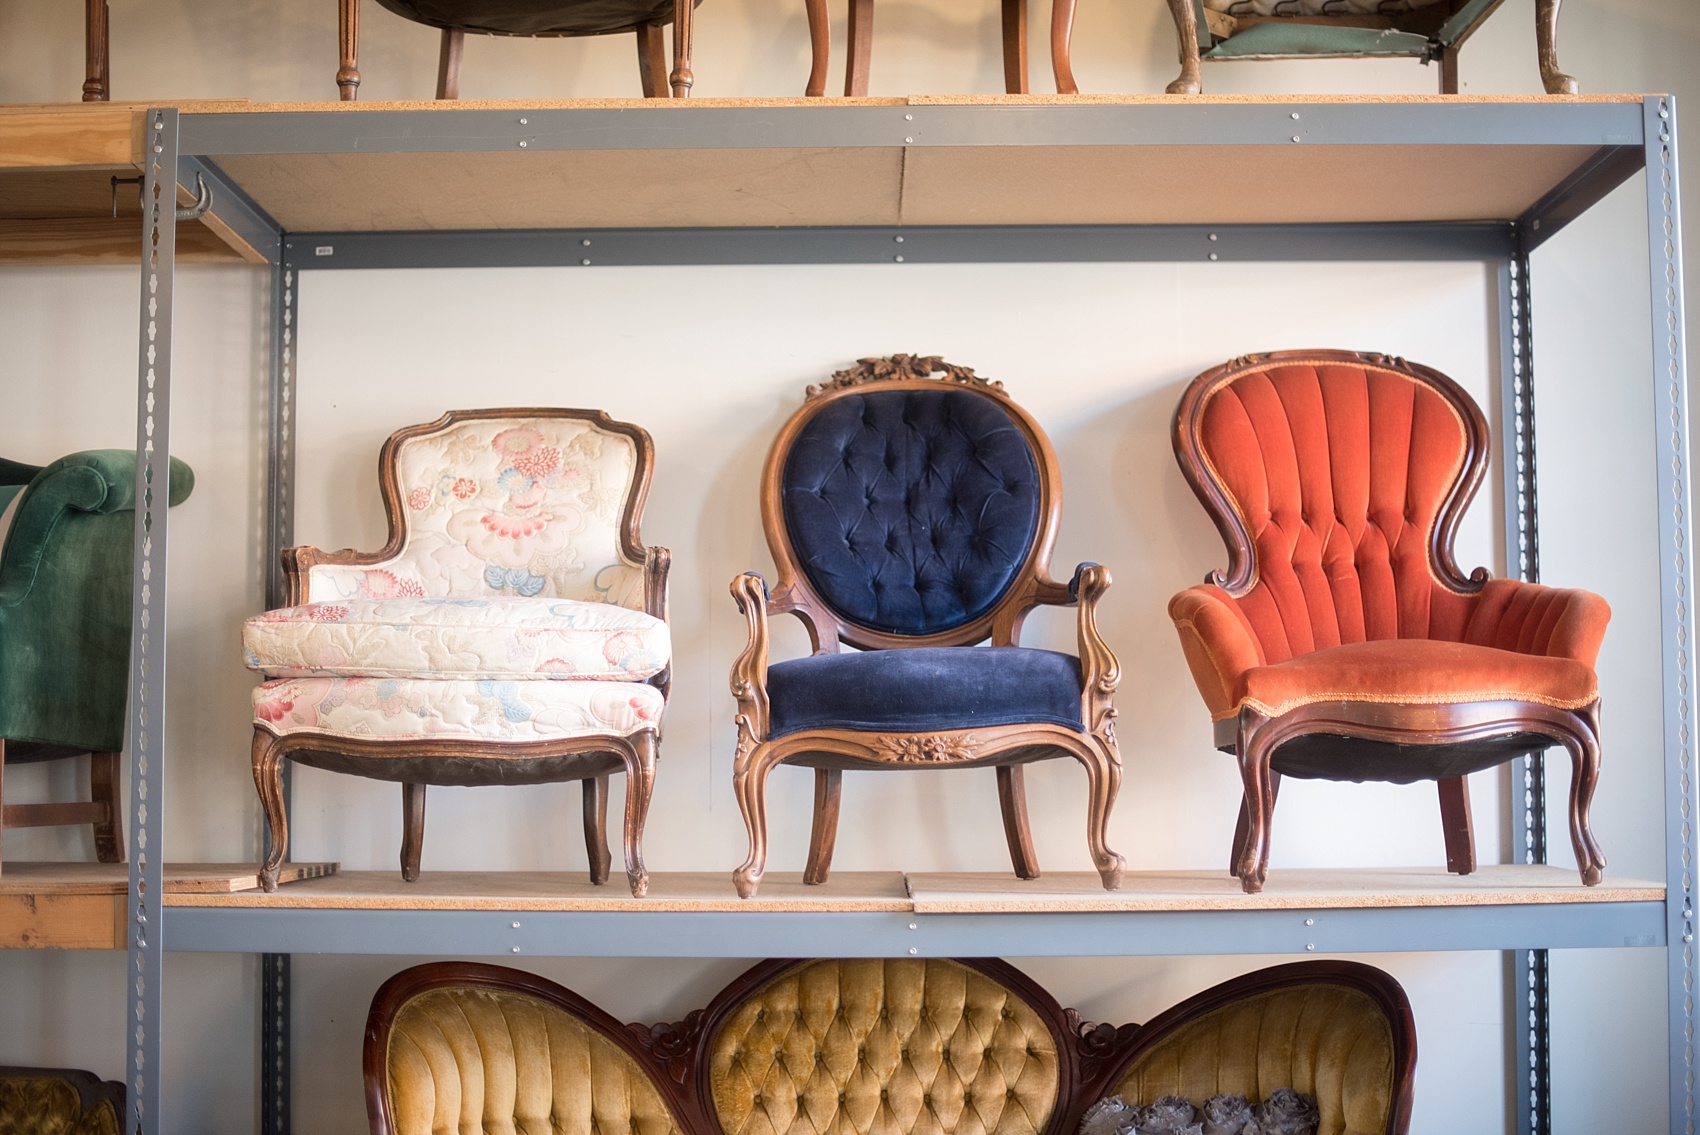 Mikkel Paige Photography photos of vintage furniture renal company Paisley and Jade in Richmond, Virginia. Velvet tufted chairs in red, blue, white and yellow.